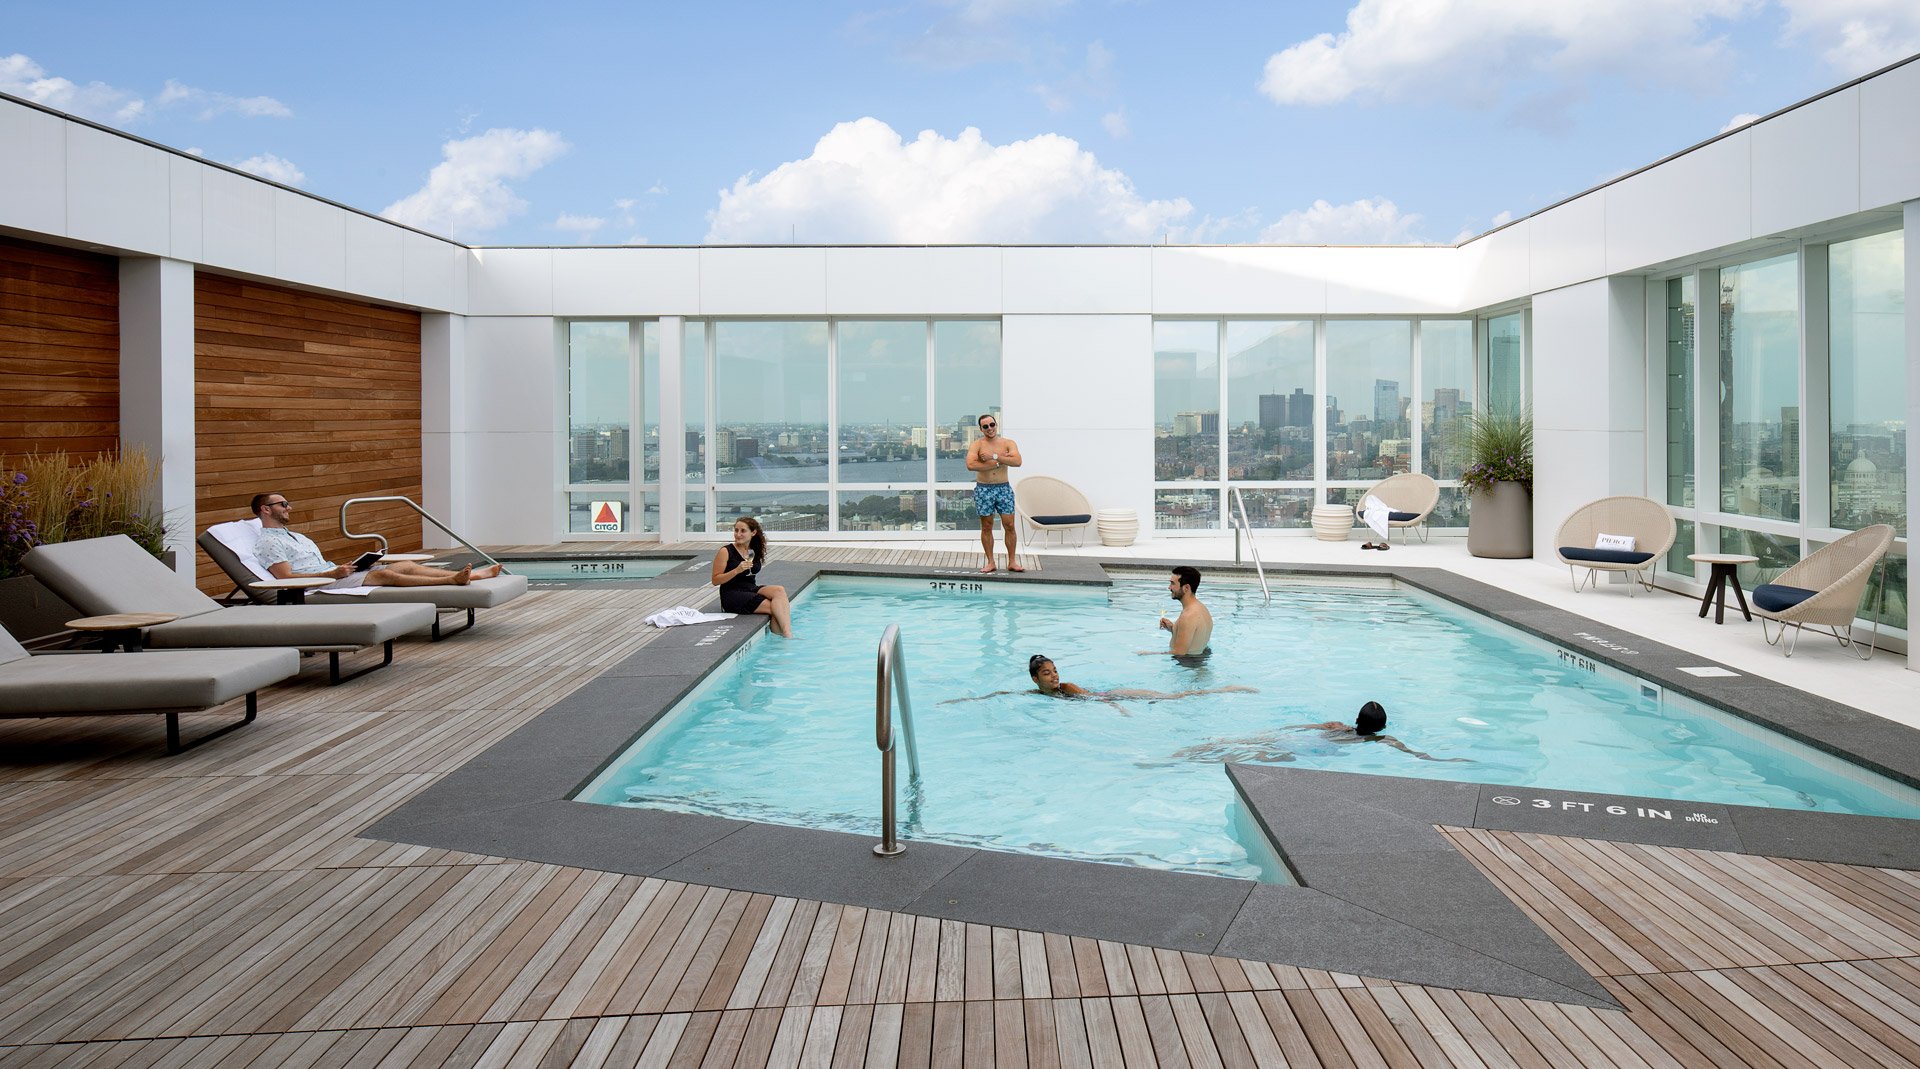 A rooftop pool with lounge chairs and a view of the city of Boston.